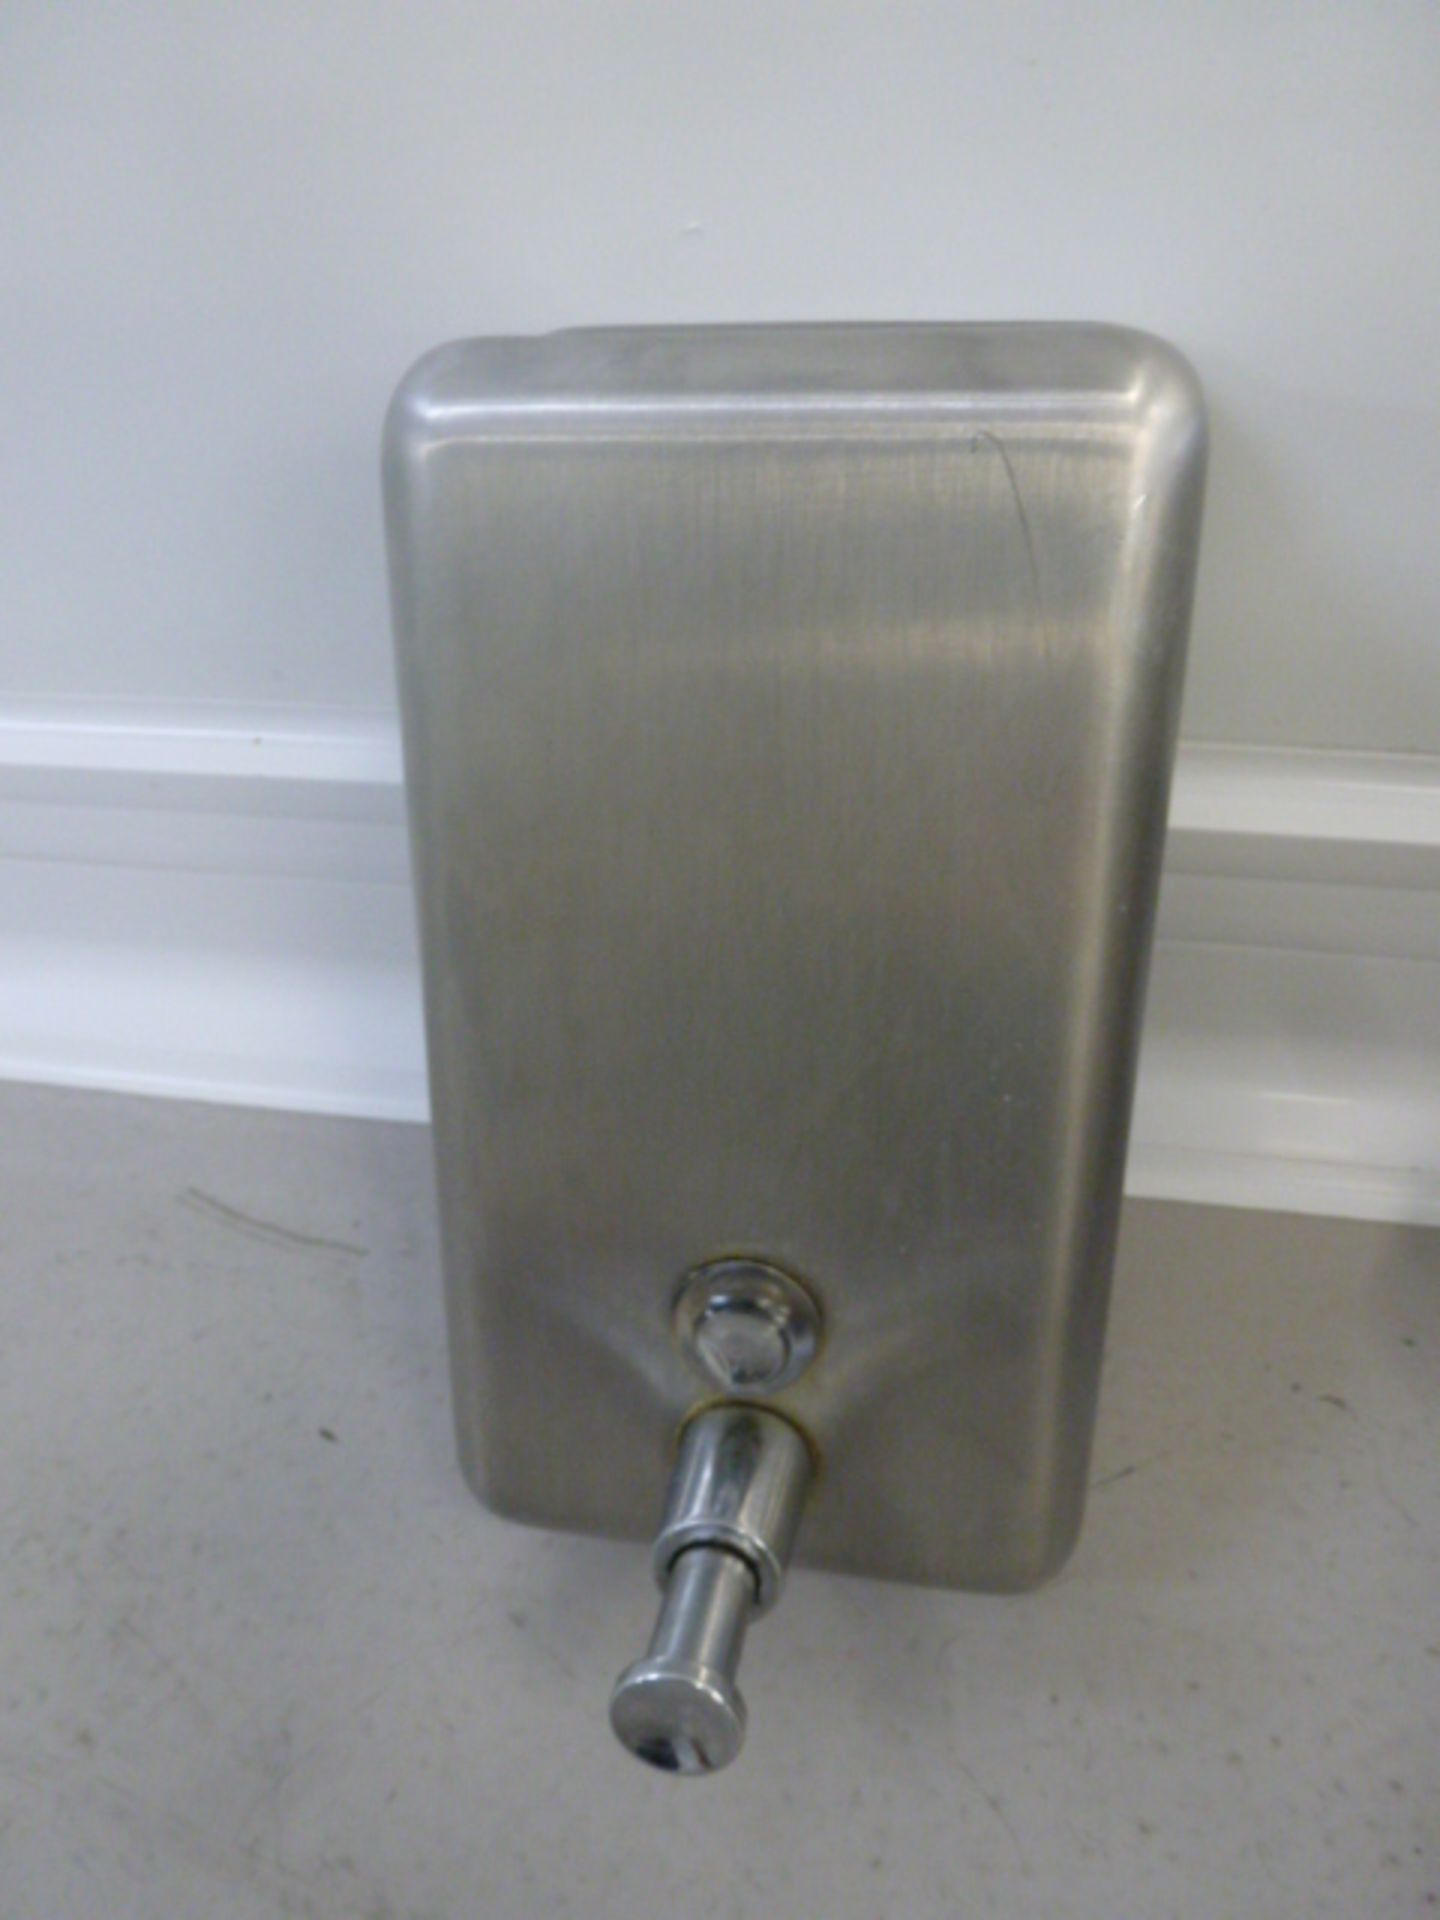 Stainless Steel Knee Operated Hand Wash Basin with Soap Dispenser. - Image 3 of 3